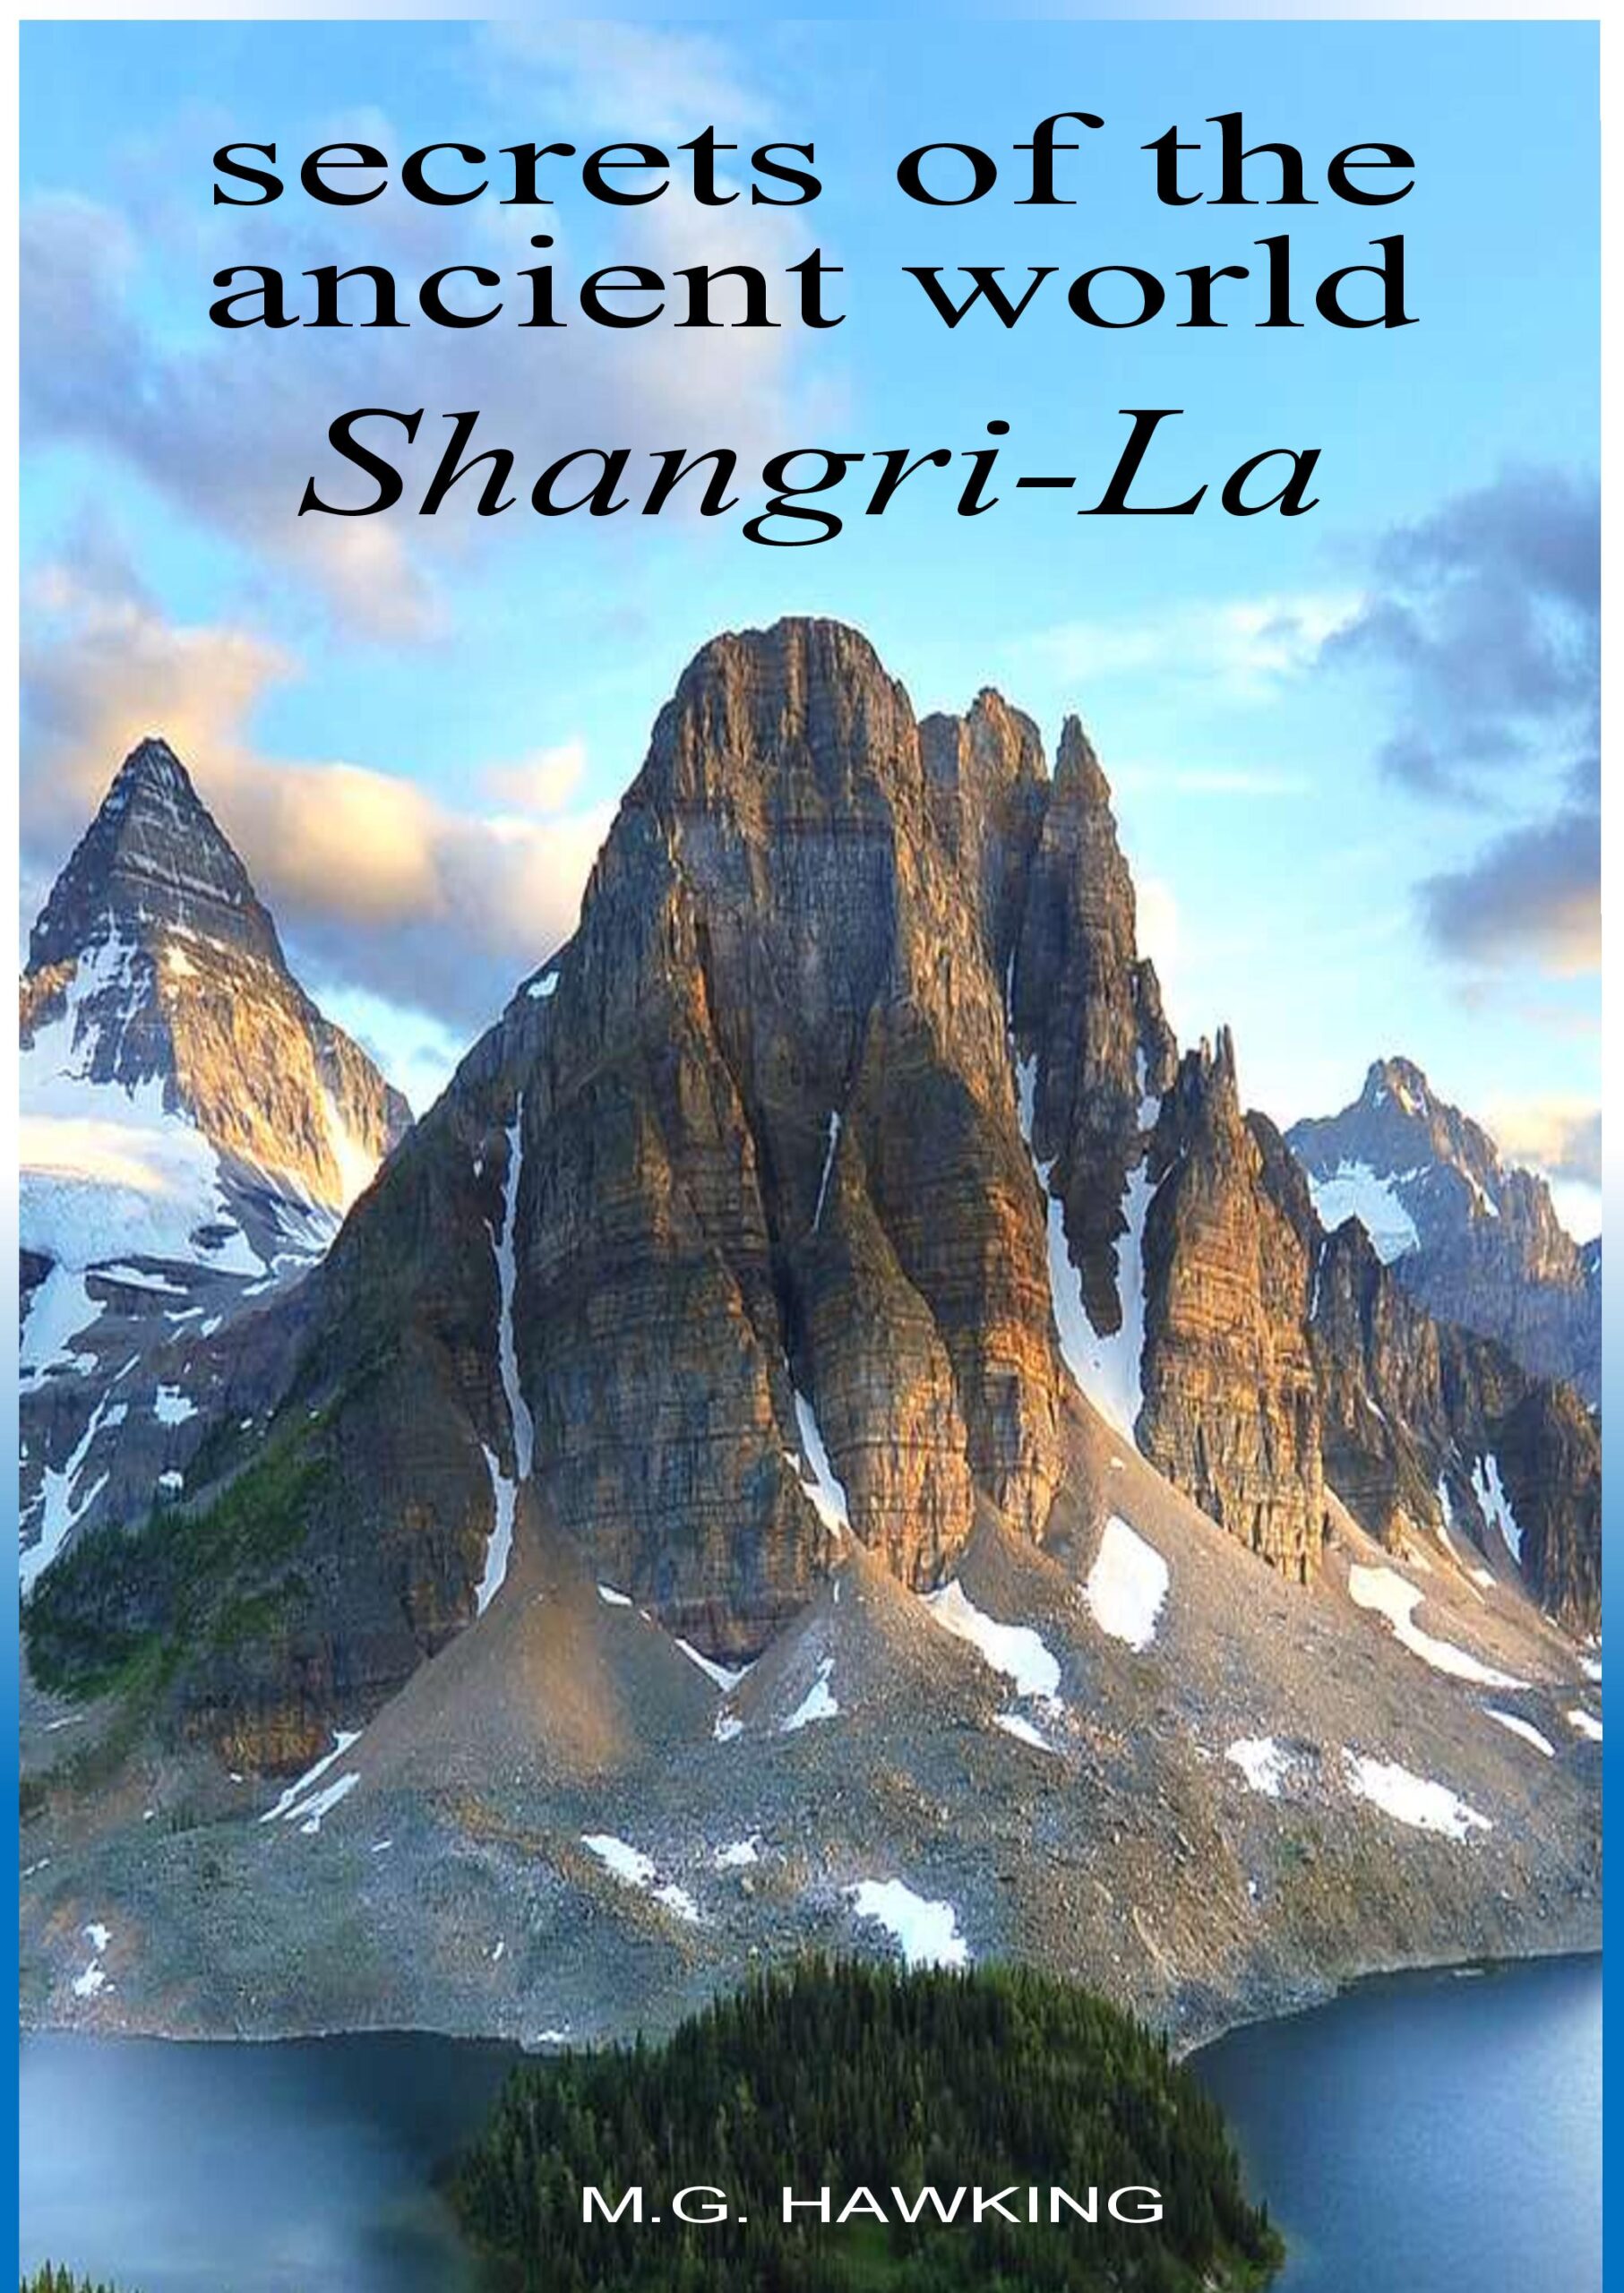 FREE: Secrets of the Ancient World, Shangri-La: The Himalayan Journals by M.G. Hawking